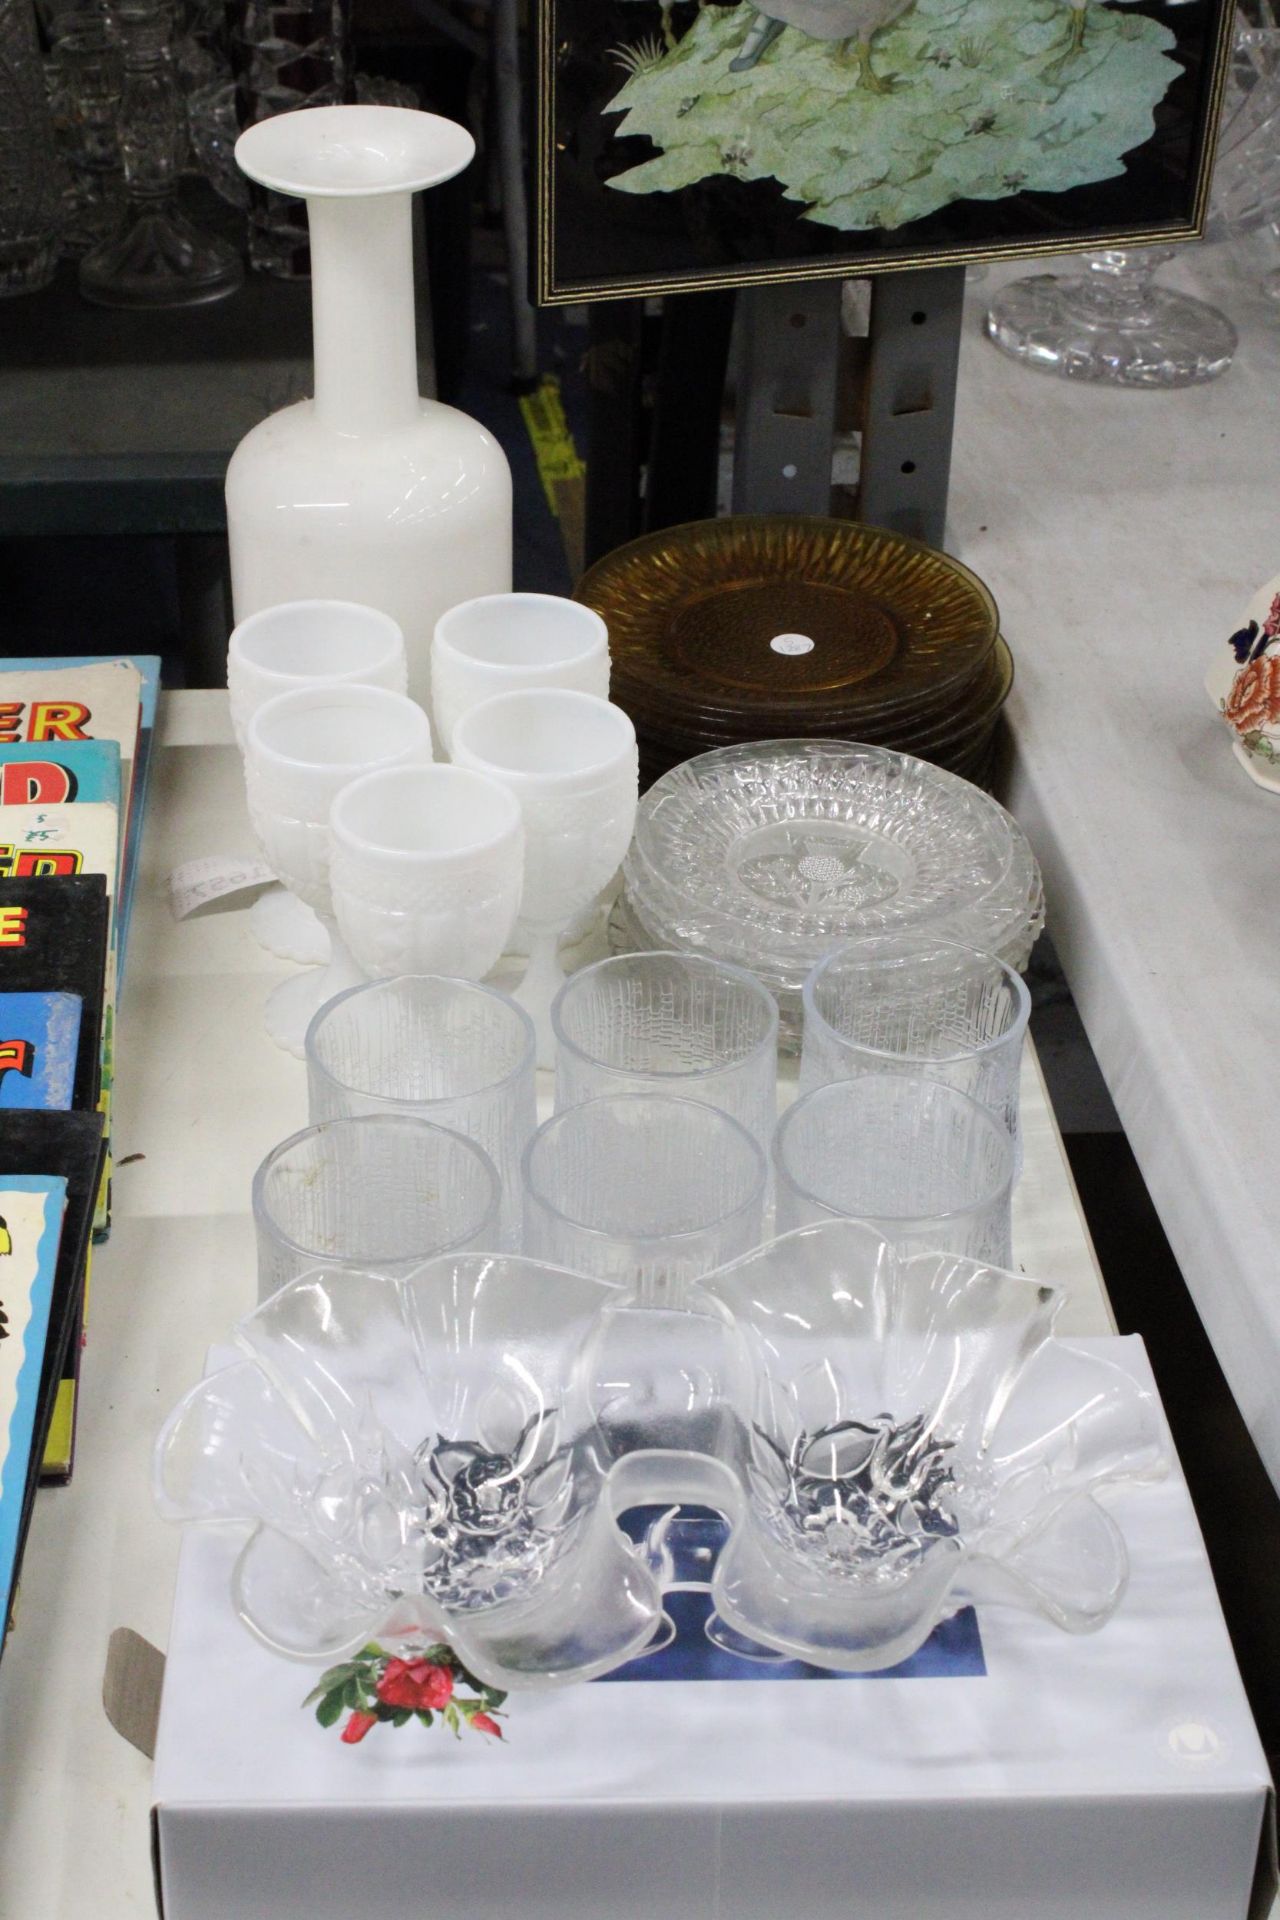 A QUANTITY OF GLASSWARE TO INCLUDE A WHITE BOTTLE AND GOBLETS, TUMBLERS, PLATES AND A 'BIANCA'